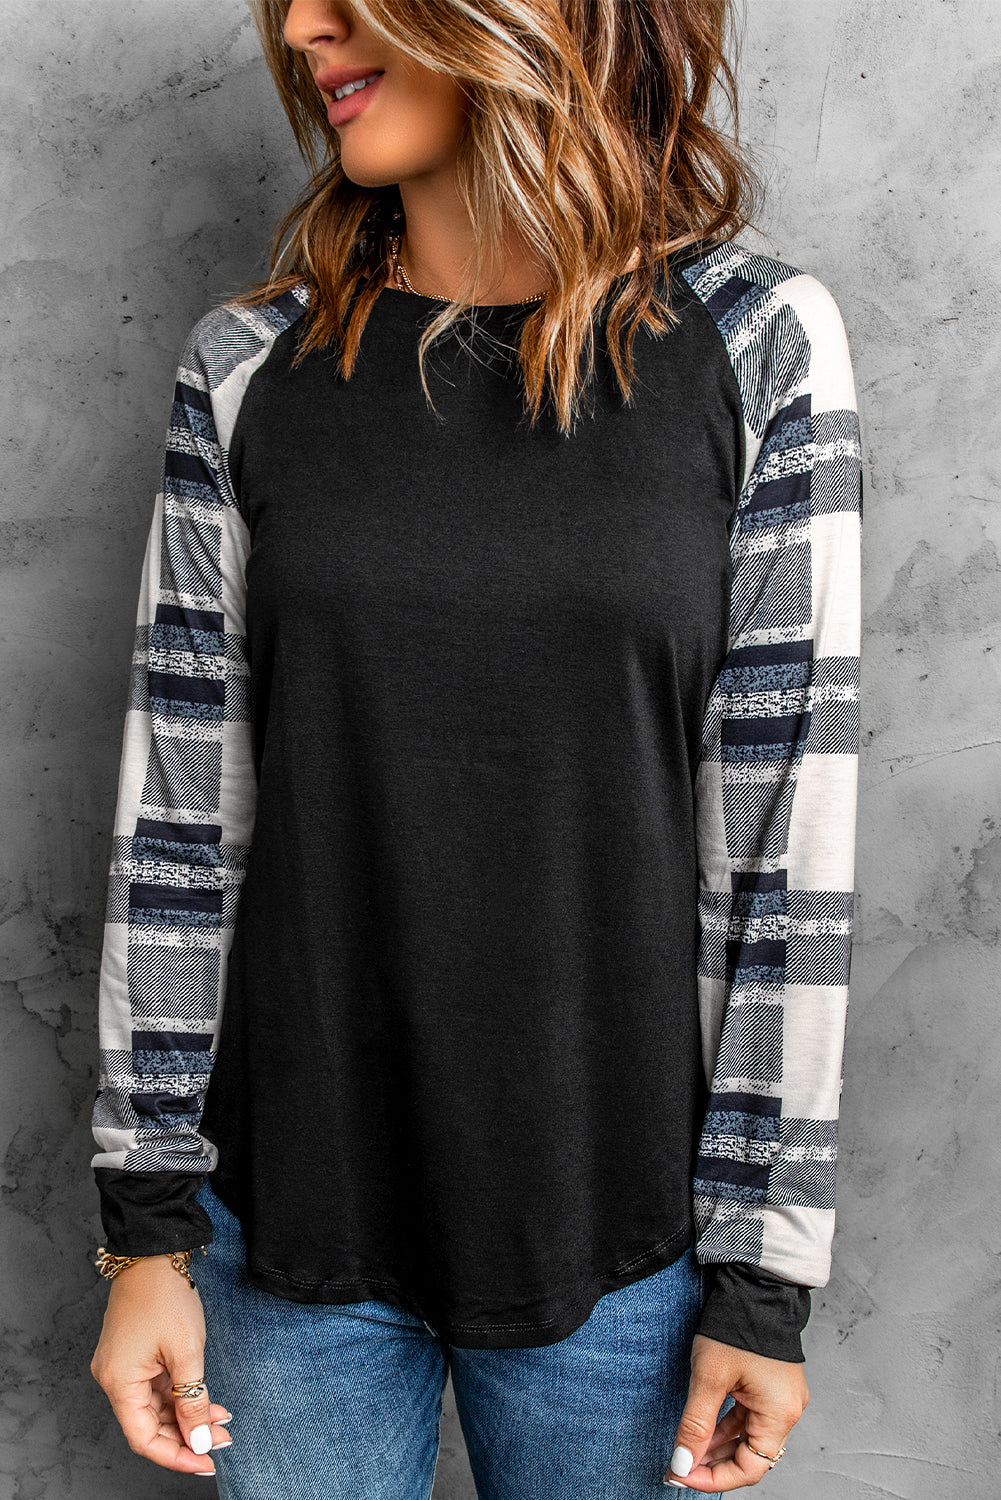 Monochrome Plaid Long Sleeves Black Pullover Top